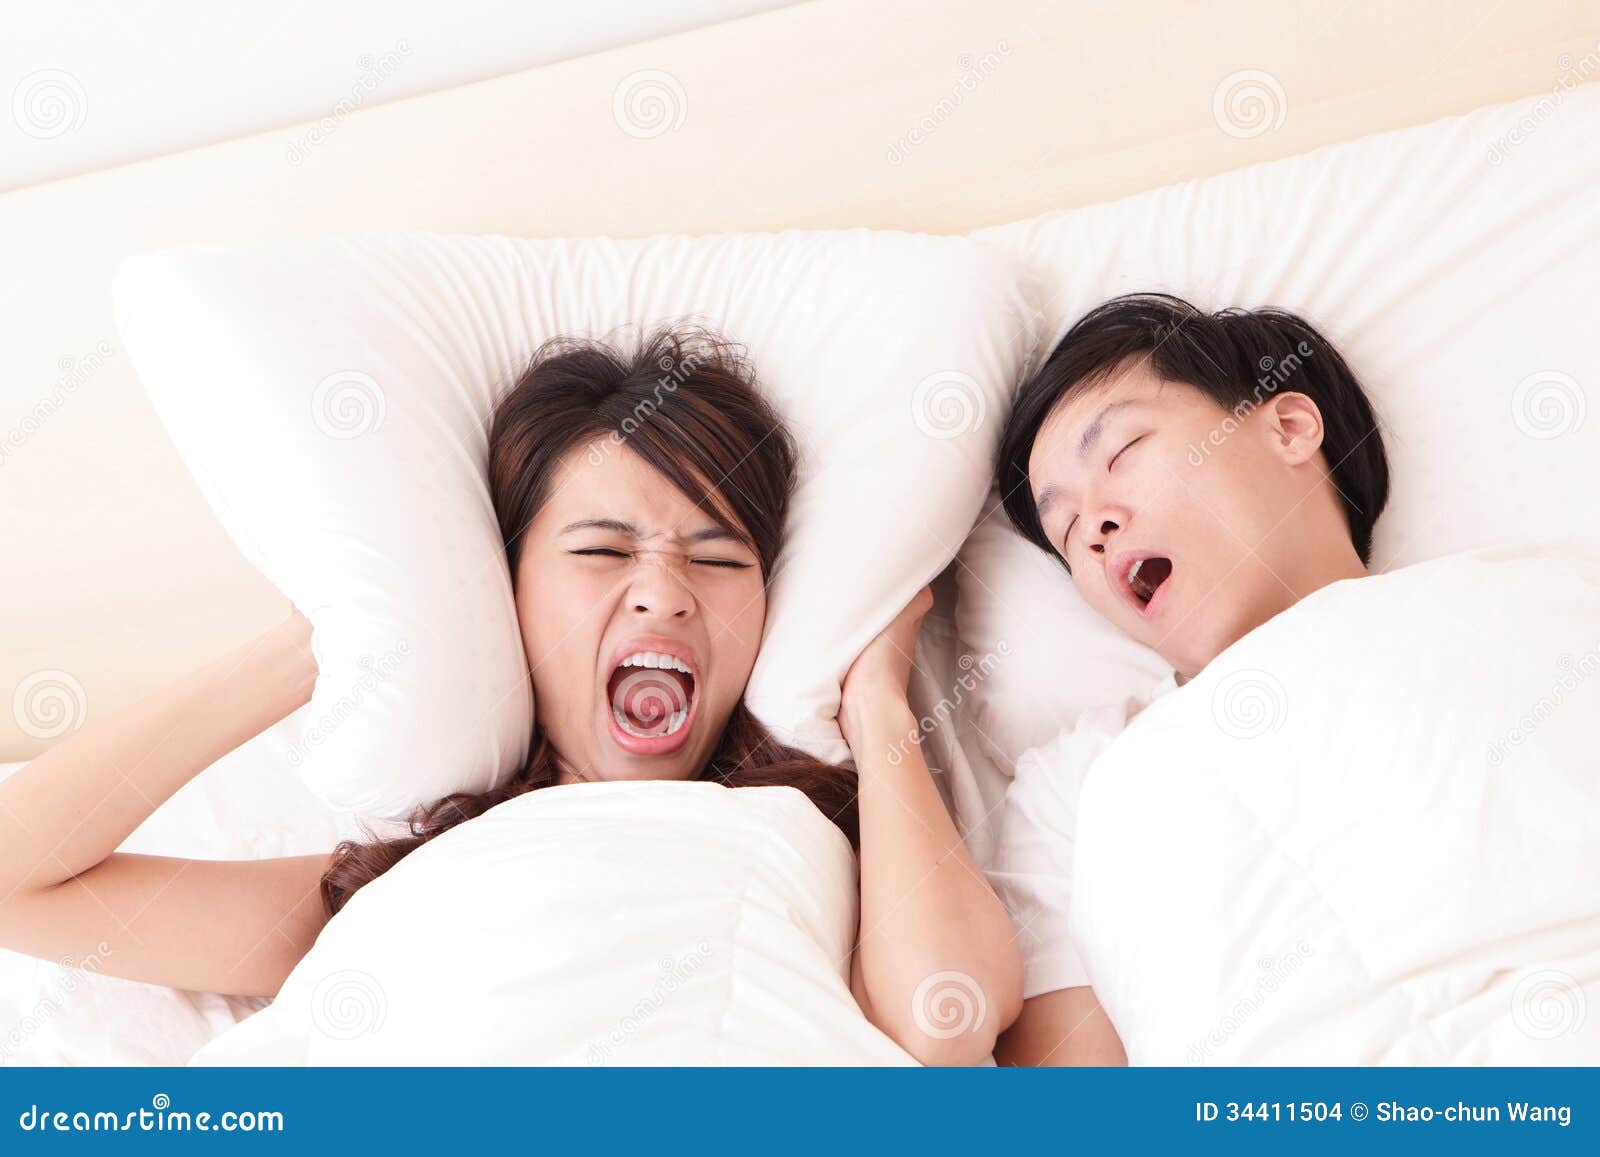 young woman disturbed by the snores of her husband